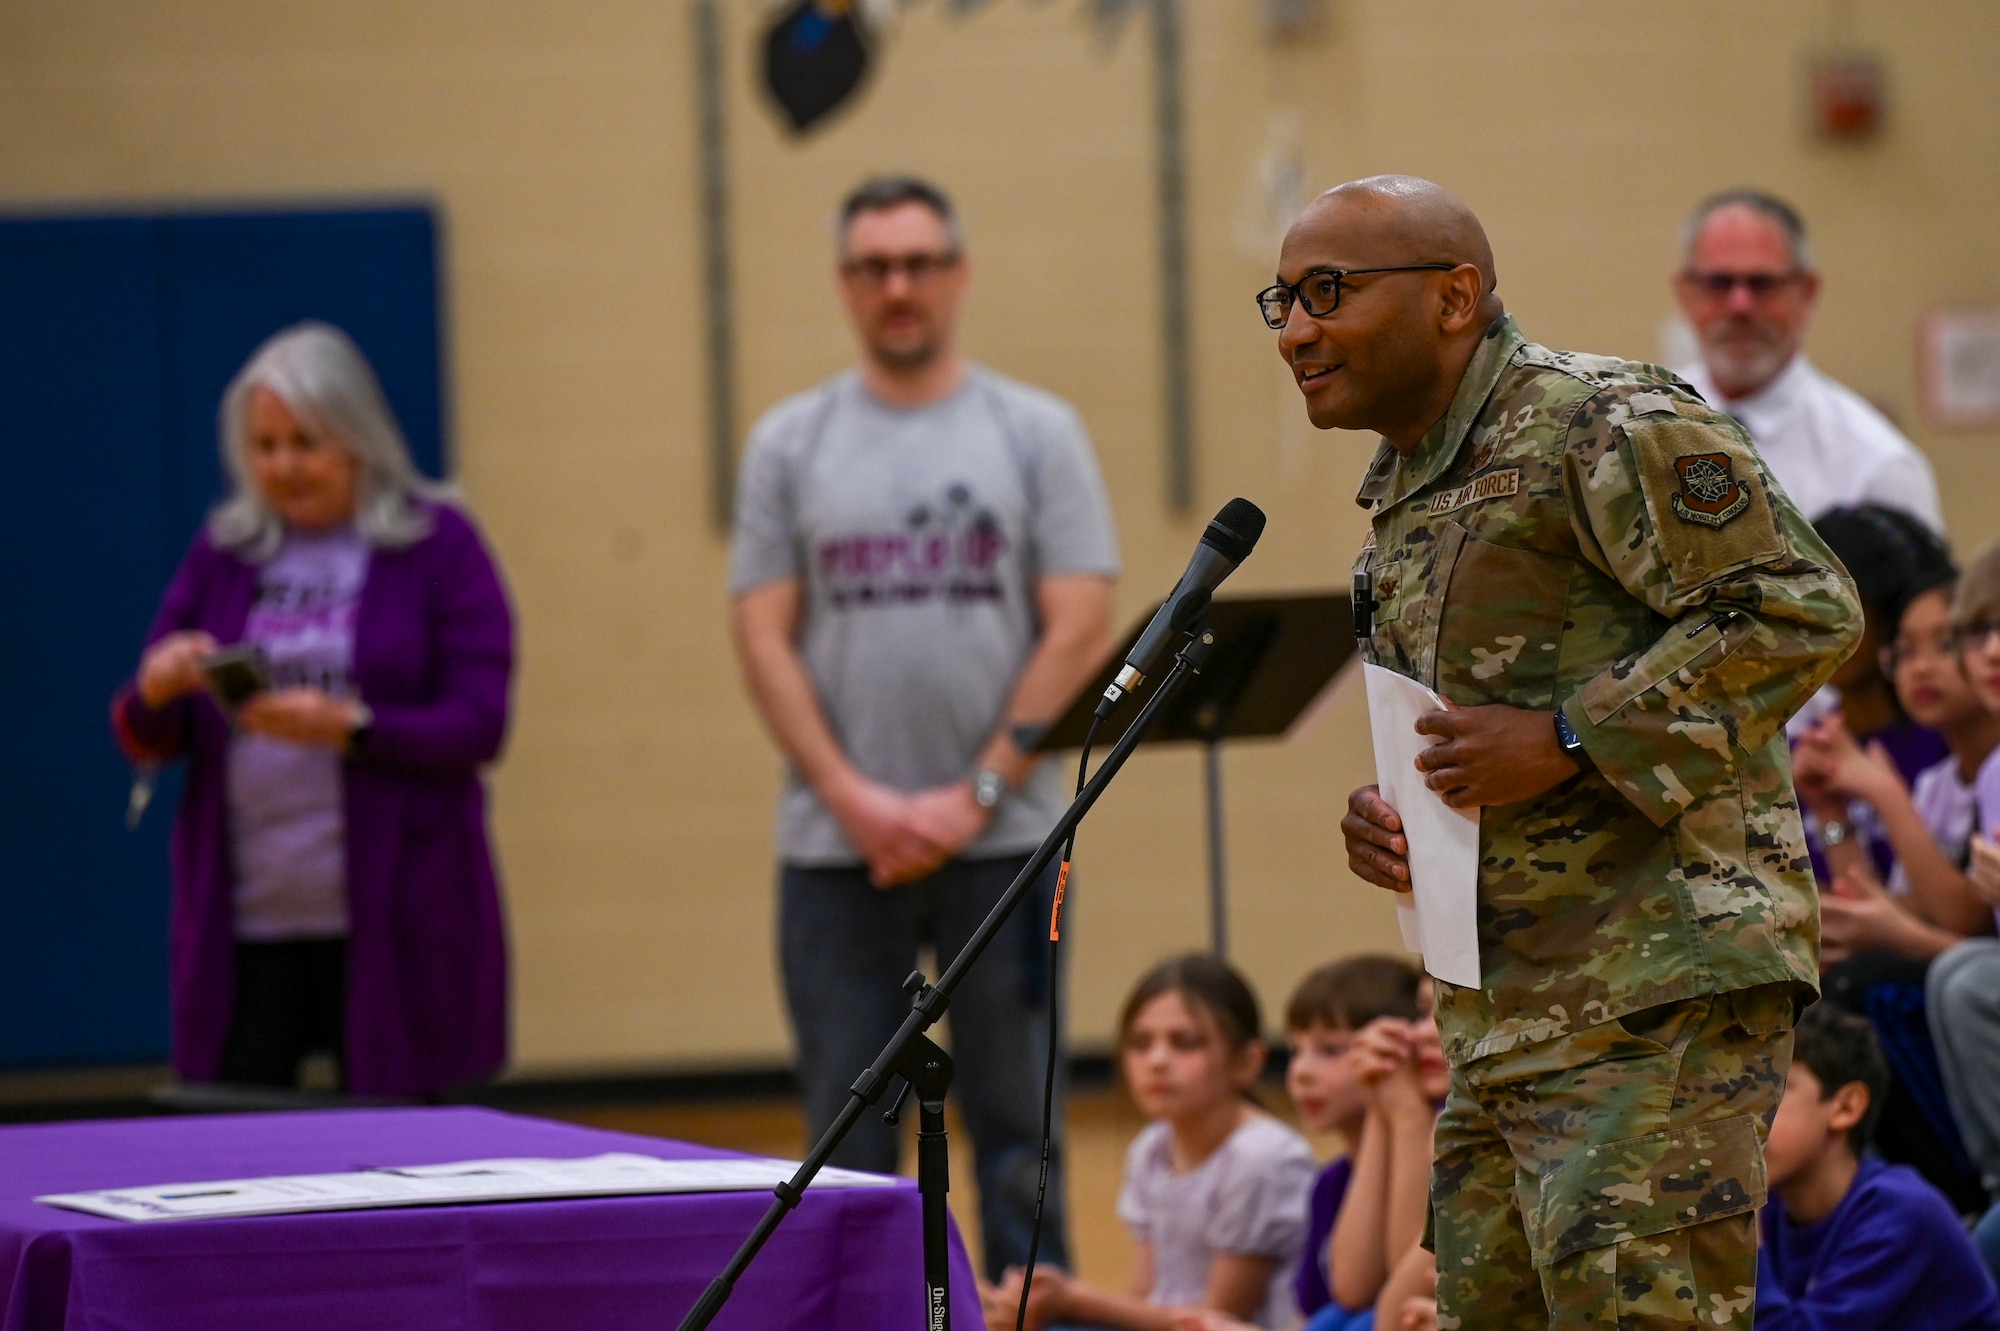 A Colonel speaks to children at a school.